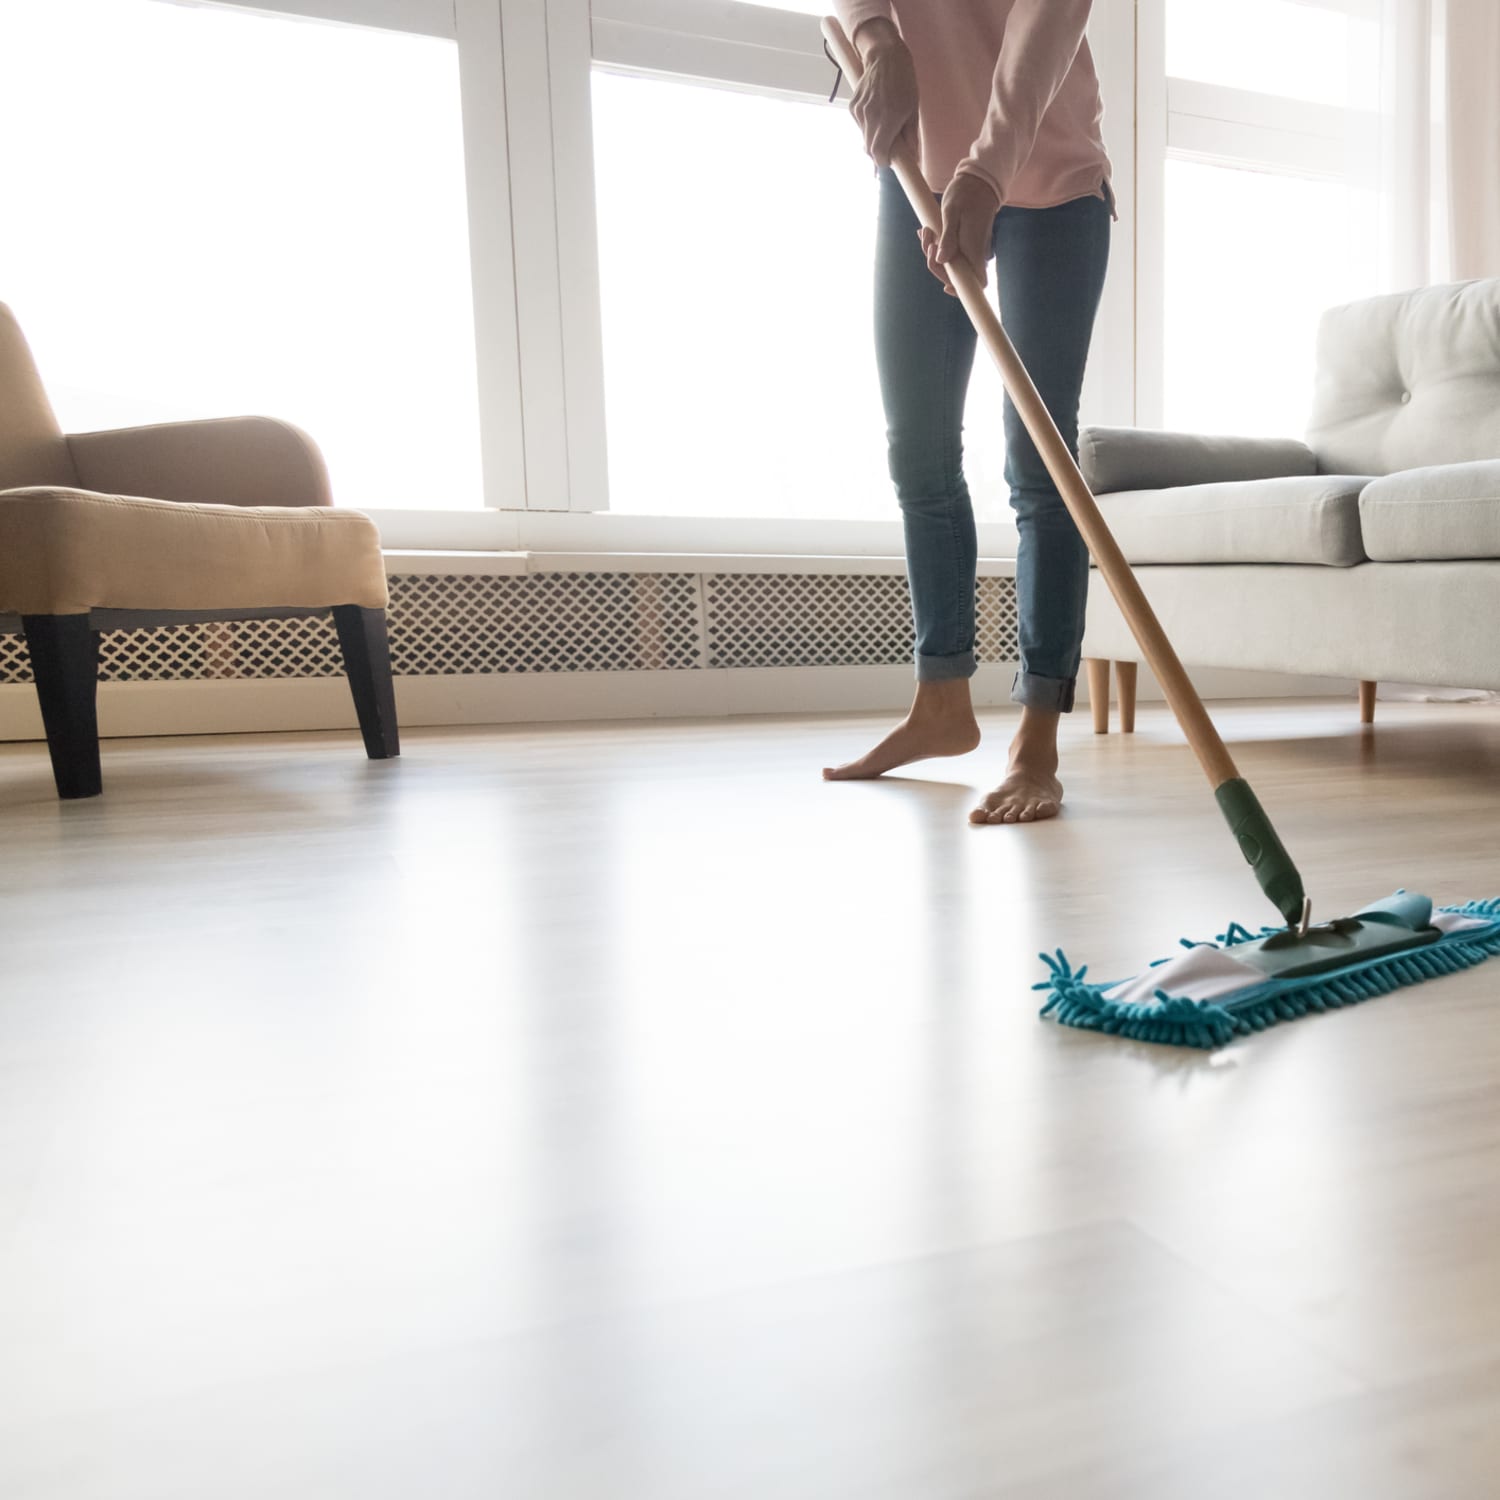 How to Clean the Mop you Depend on